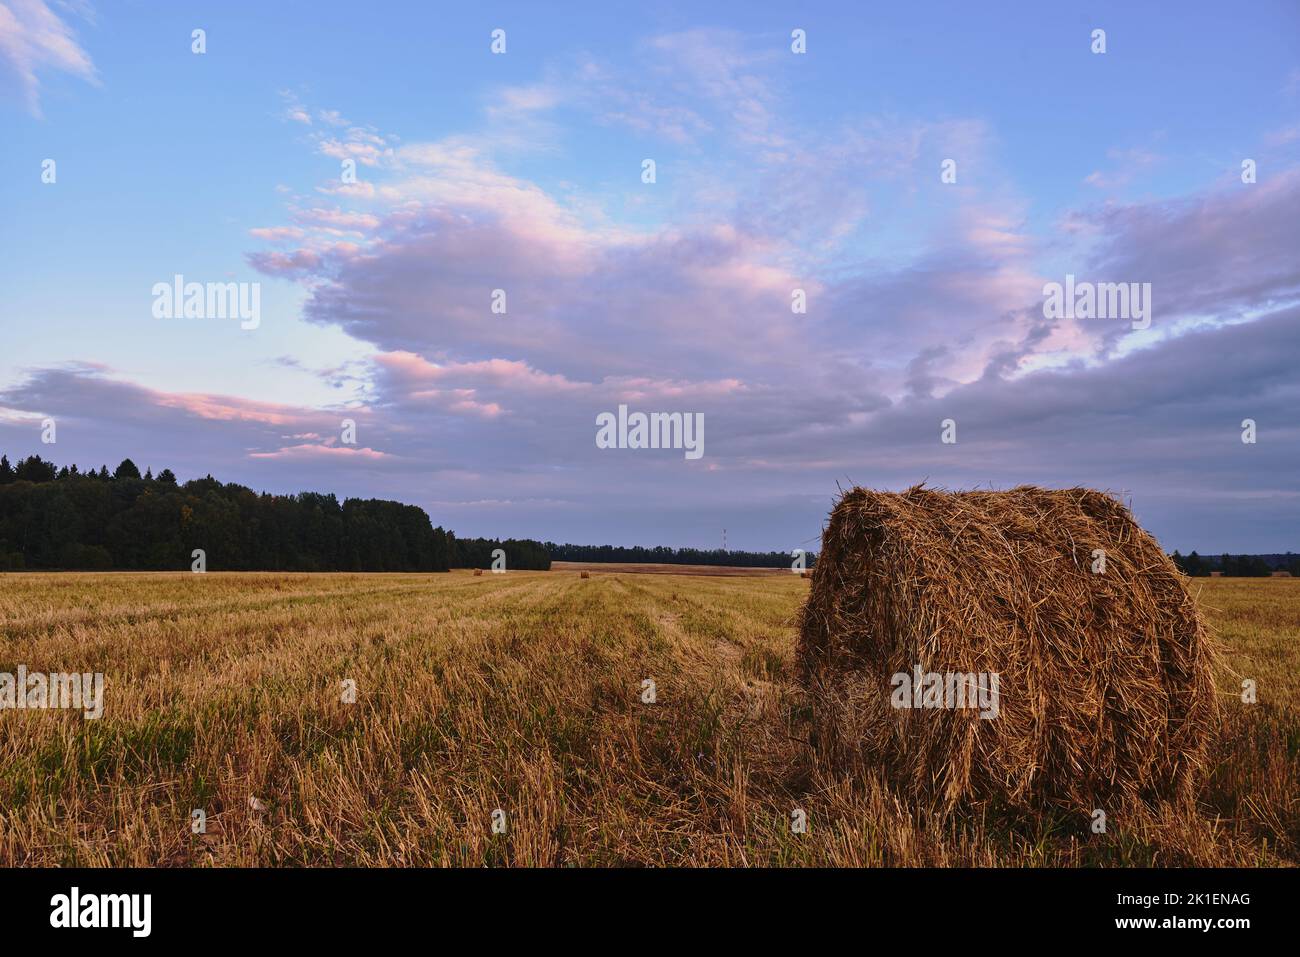 A mown field with haystacks under a cloudy sky at sunset. Stock Photo